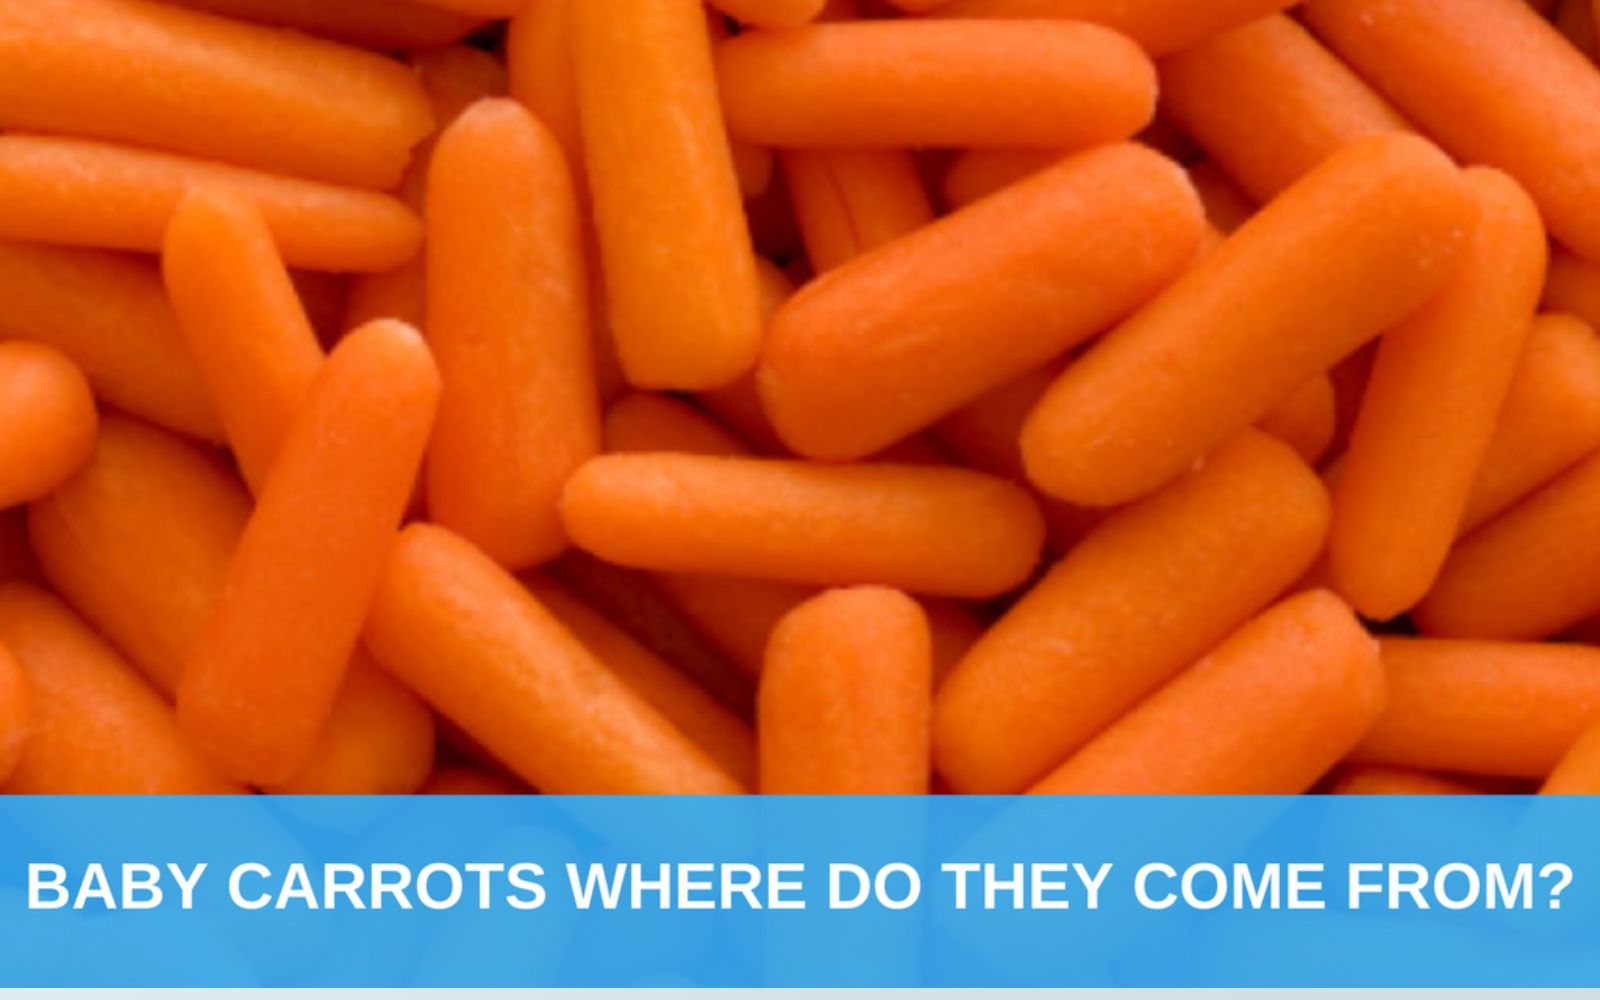 Baby carrots where do they come from?